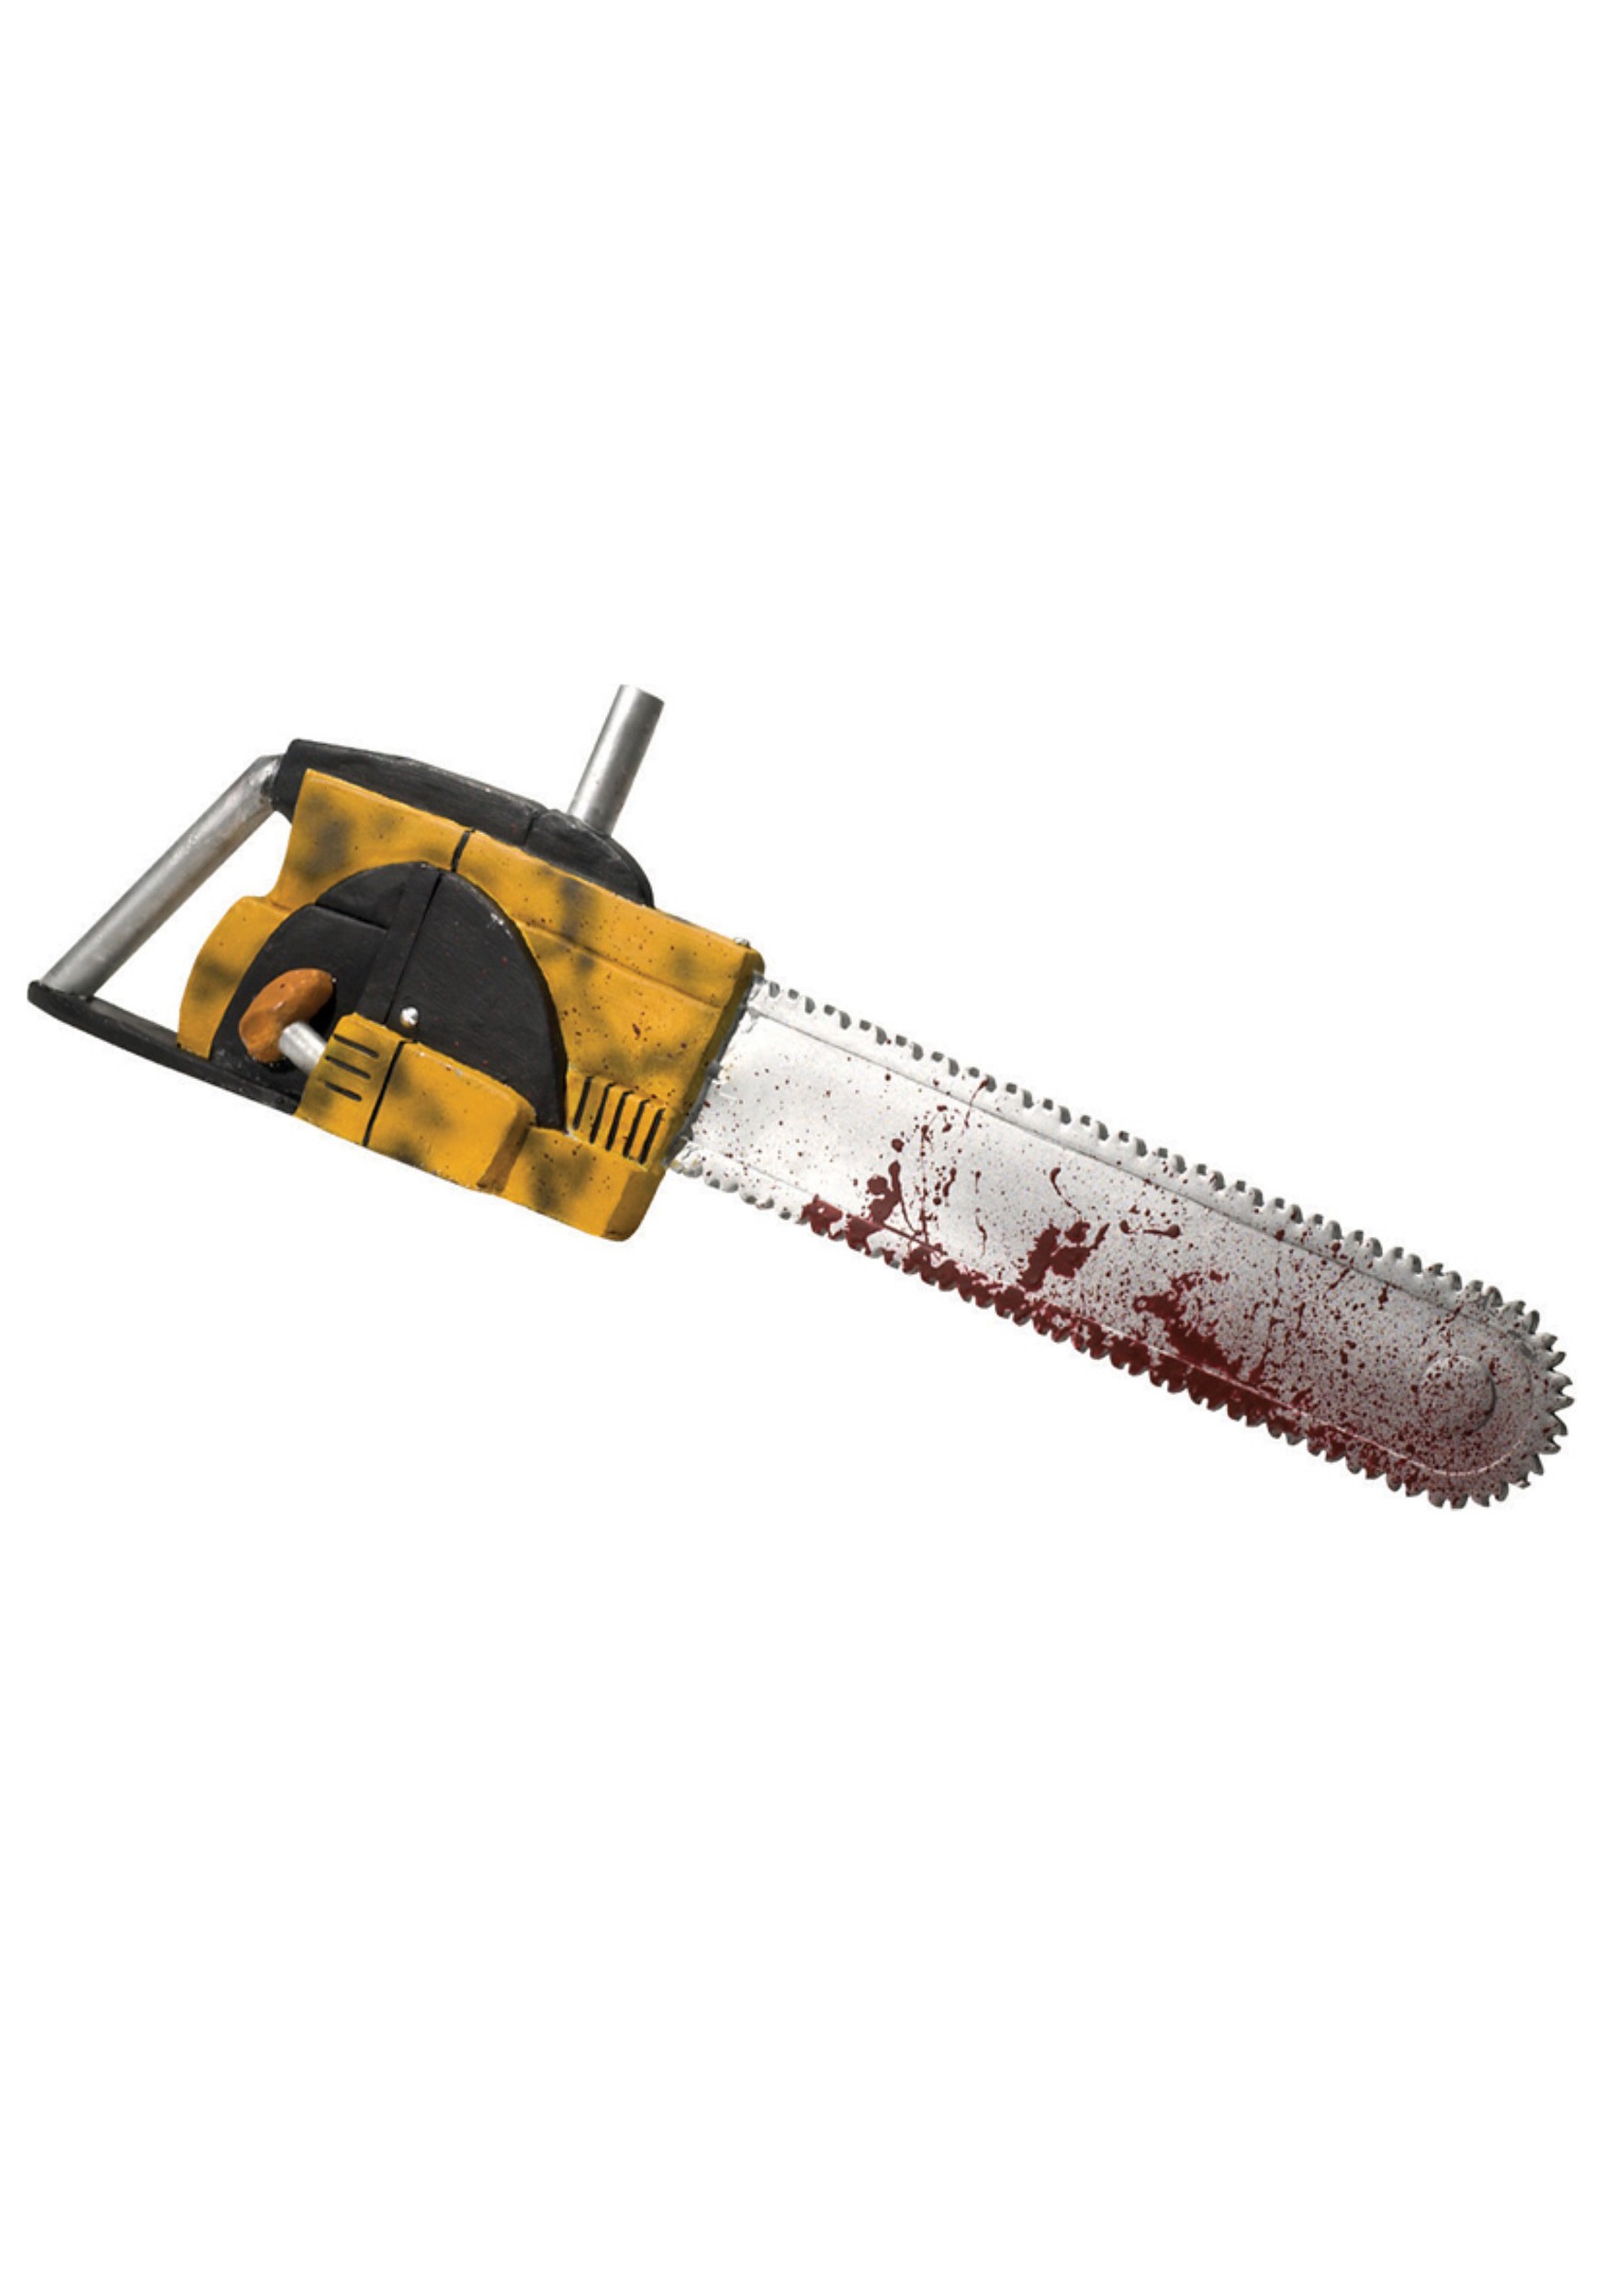 Leatherface chainsaw is from the Texas Chainsaw Massacre movie and is a fun...